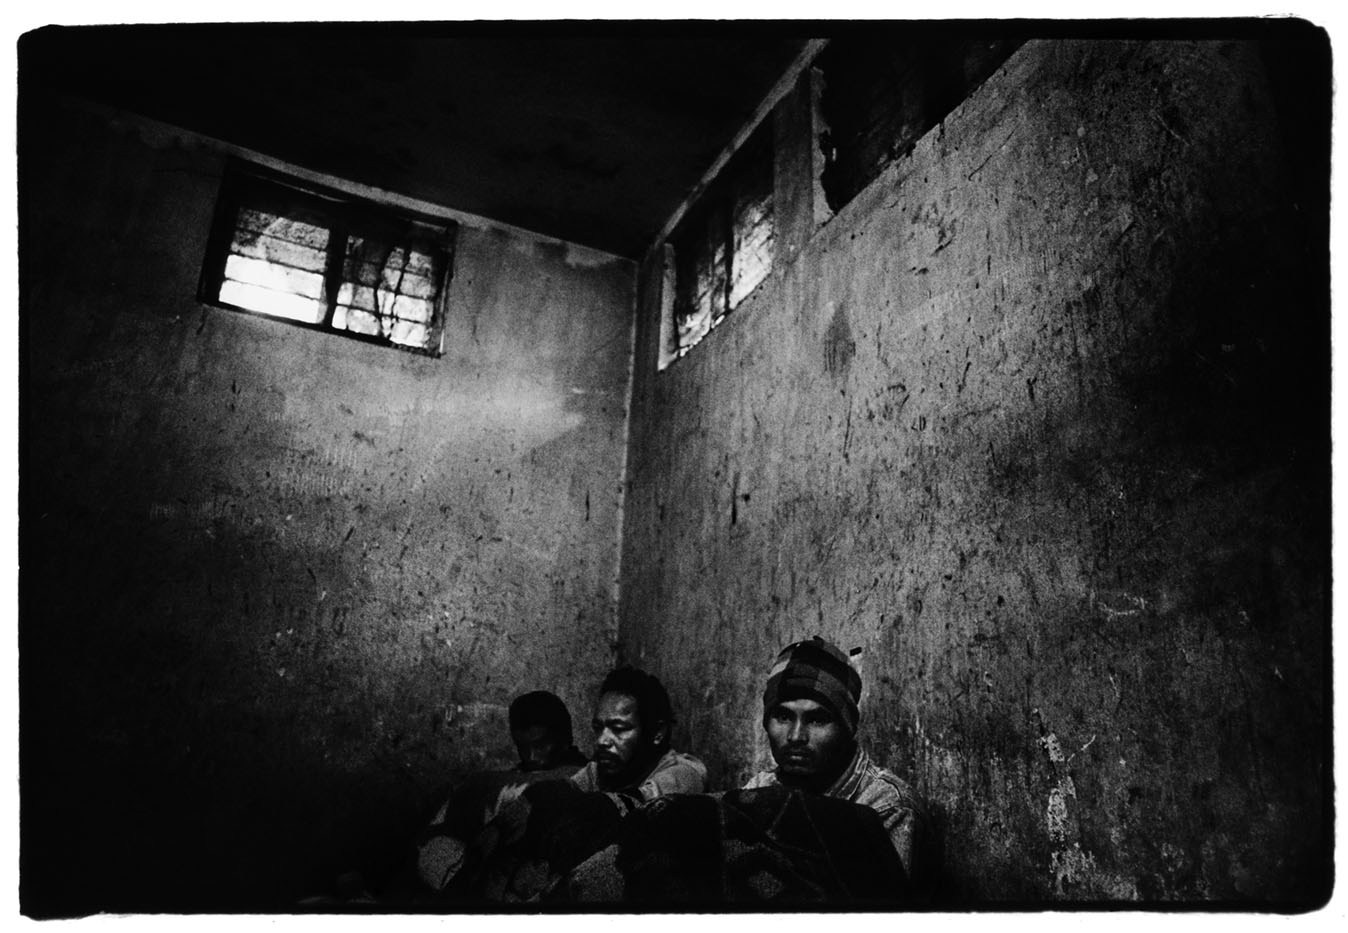 A group of poachers who have been arrested in the Chitwan National Park sit in a jail at the Kasara Royal Nepalese Army barracks.